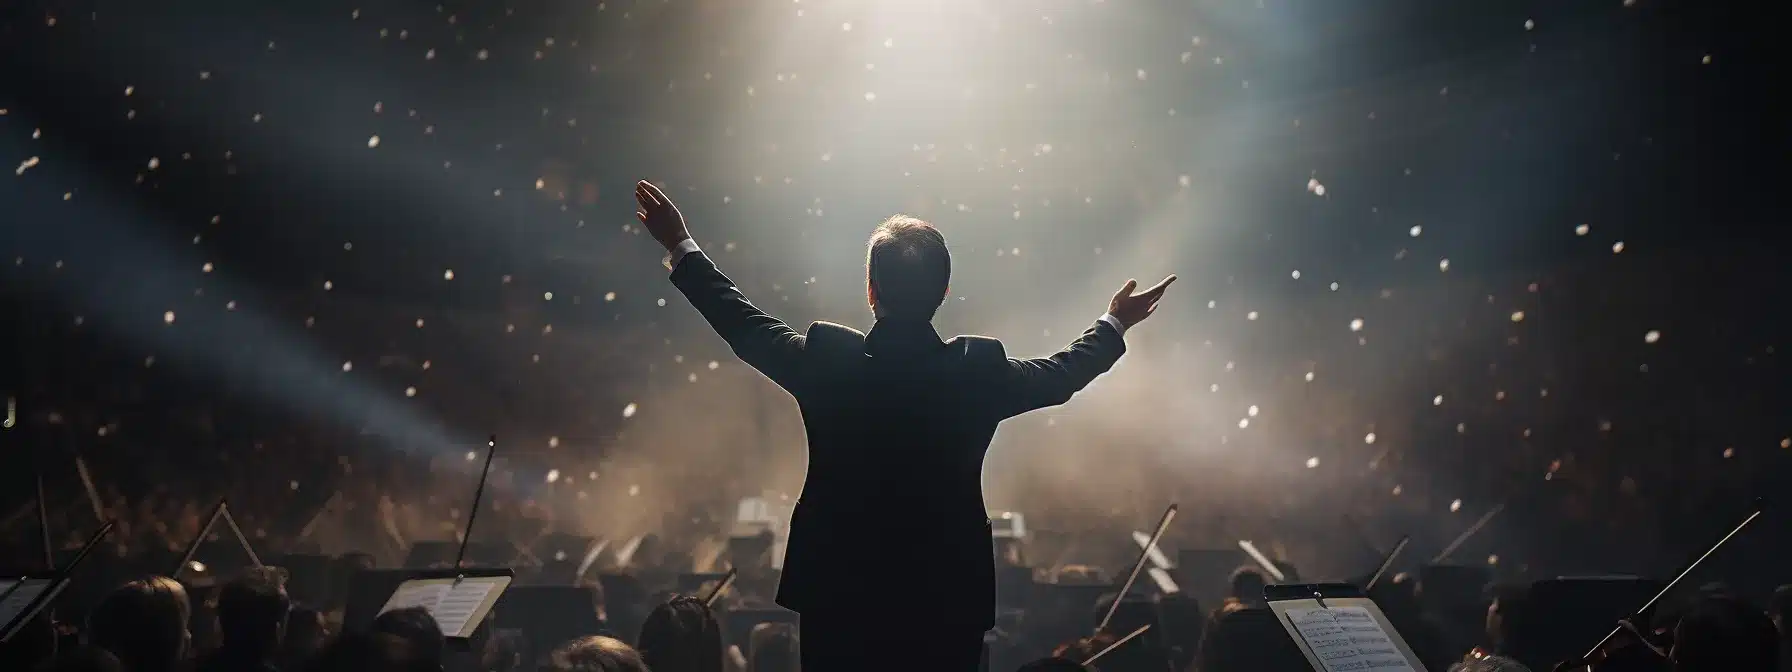 An Orchestra Conductor Passionately Conducting A Symphony, With The Baton Representing The Messaging Strategy Guiding The Brand'S Enchanting And Impactful Messages.